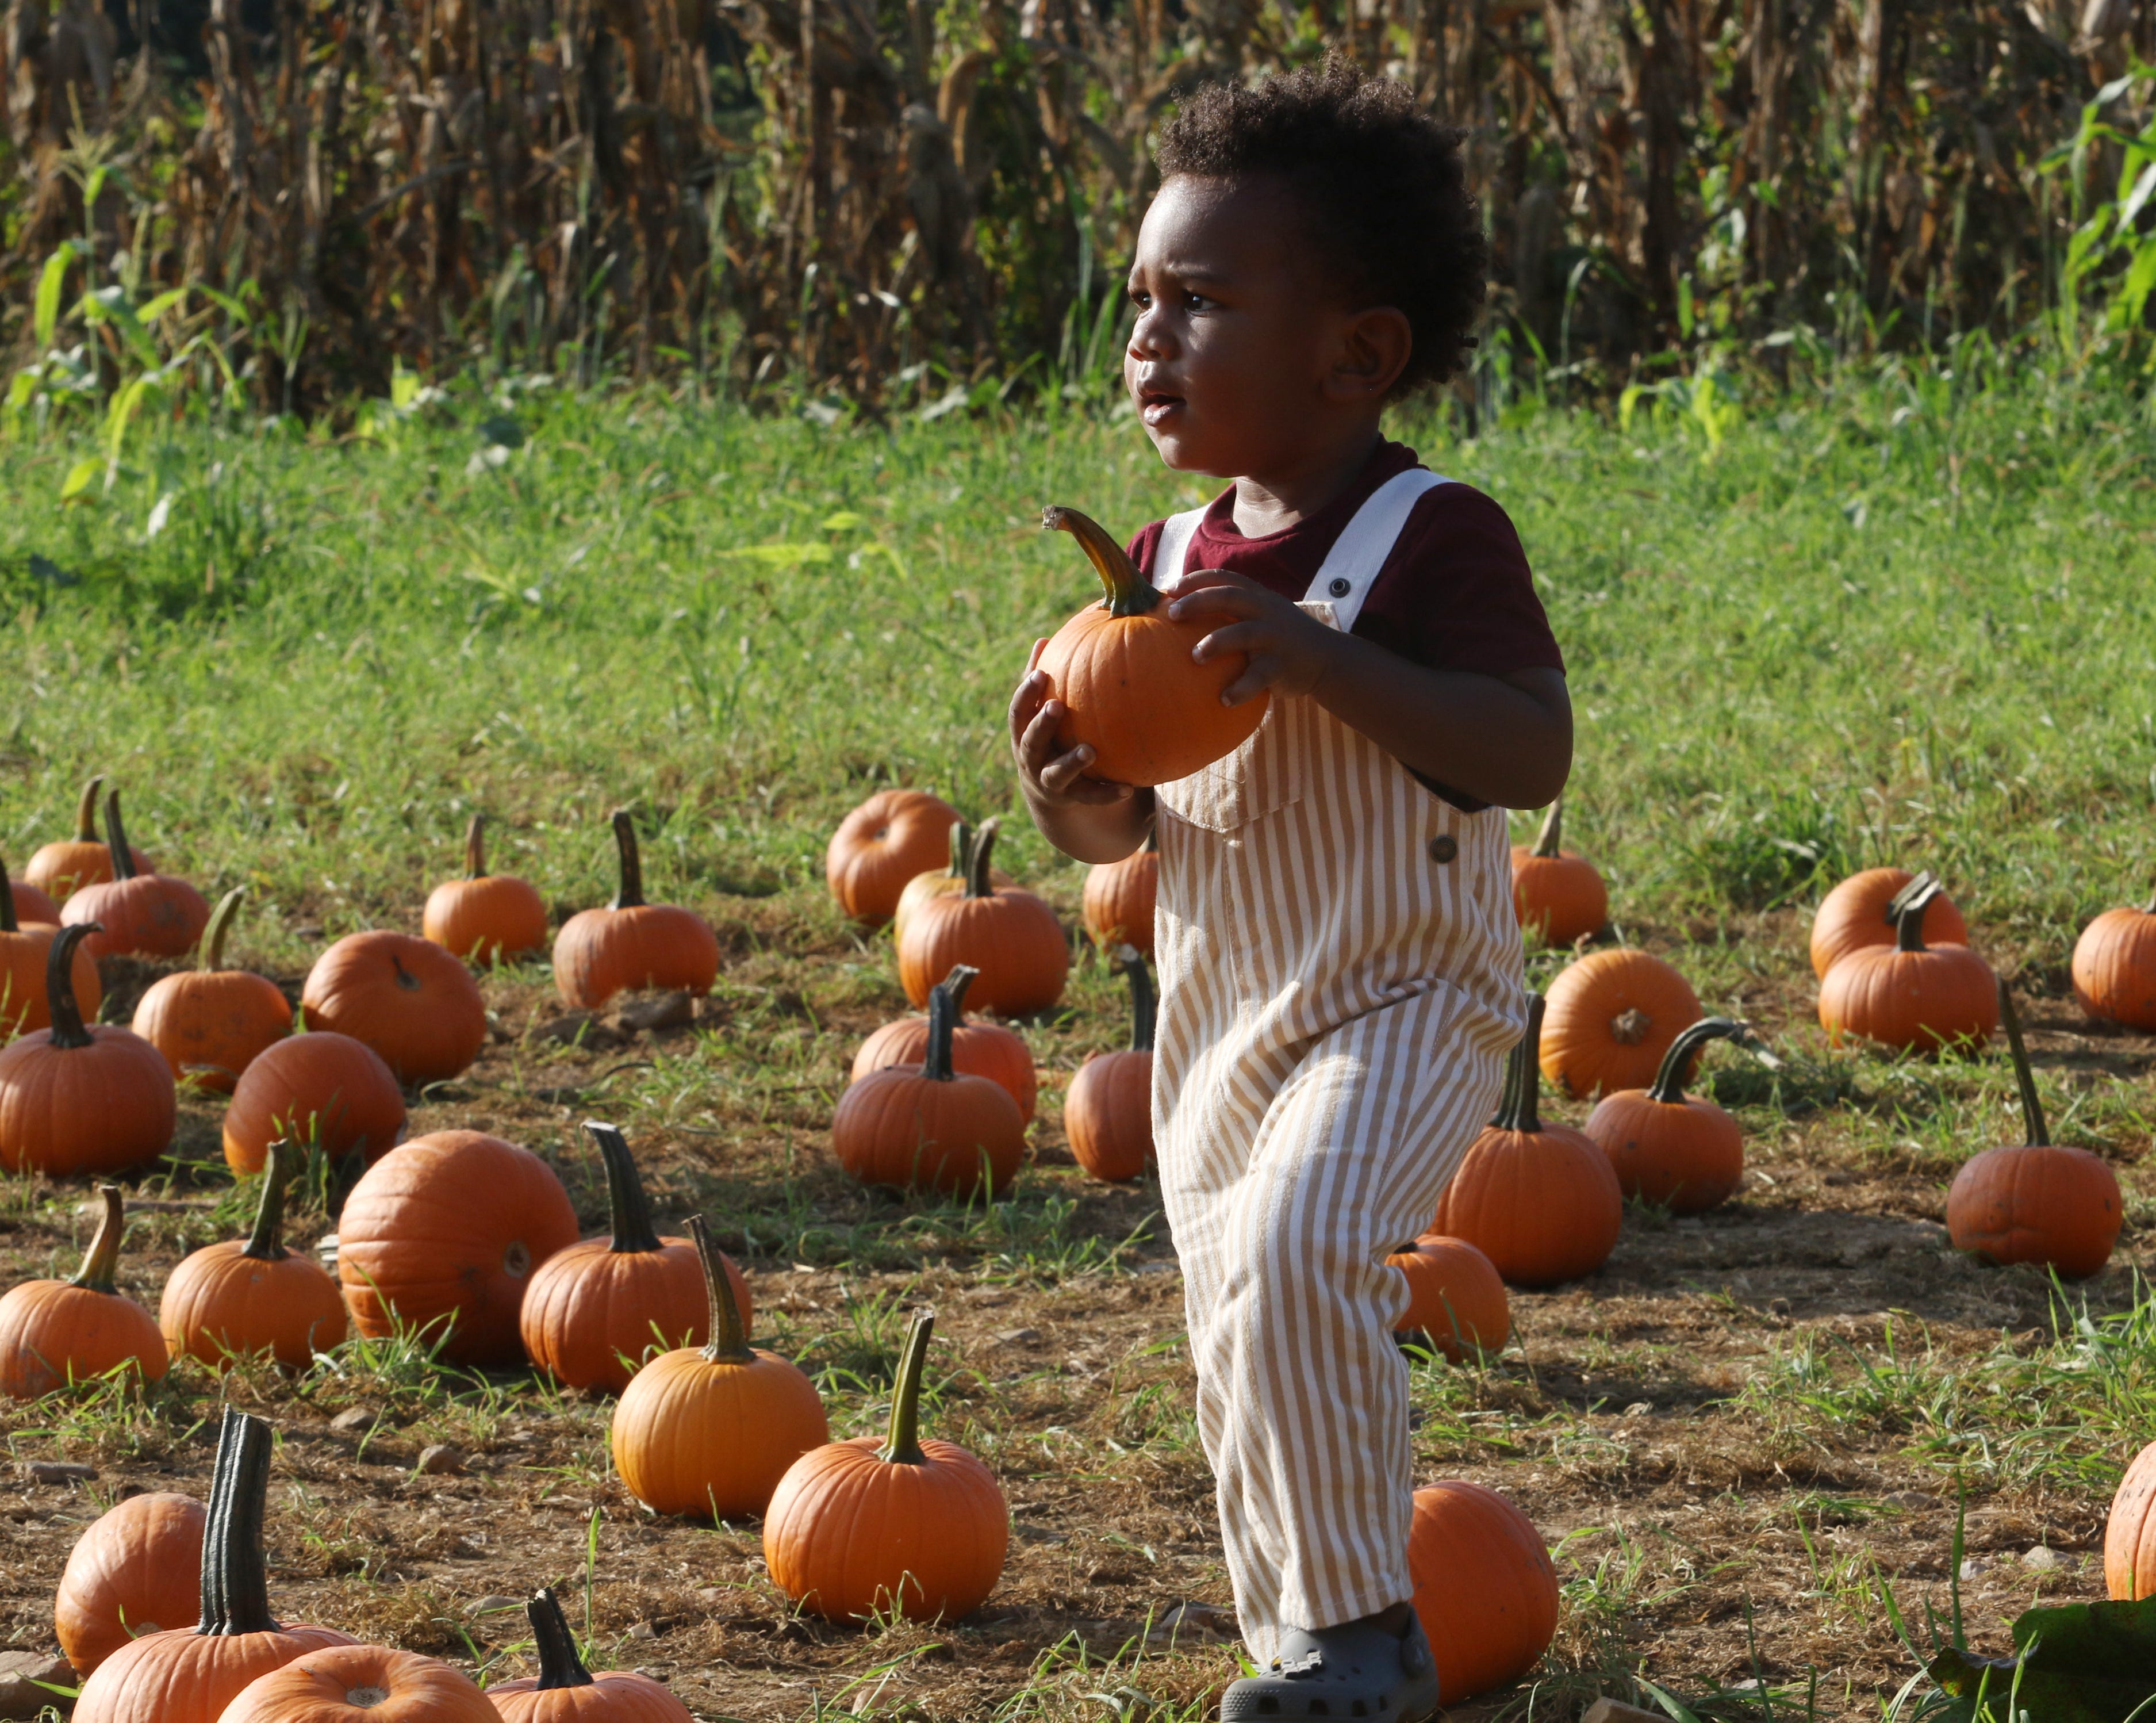 Two-year-old Legend Despinosse, of Brooklyn, was among the visitors who came to find the perfect pumpkin at Wightman Farms on October 15, 2021.